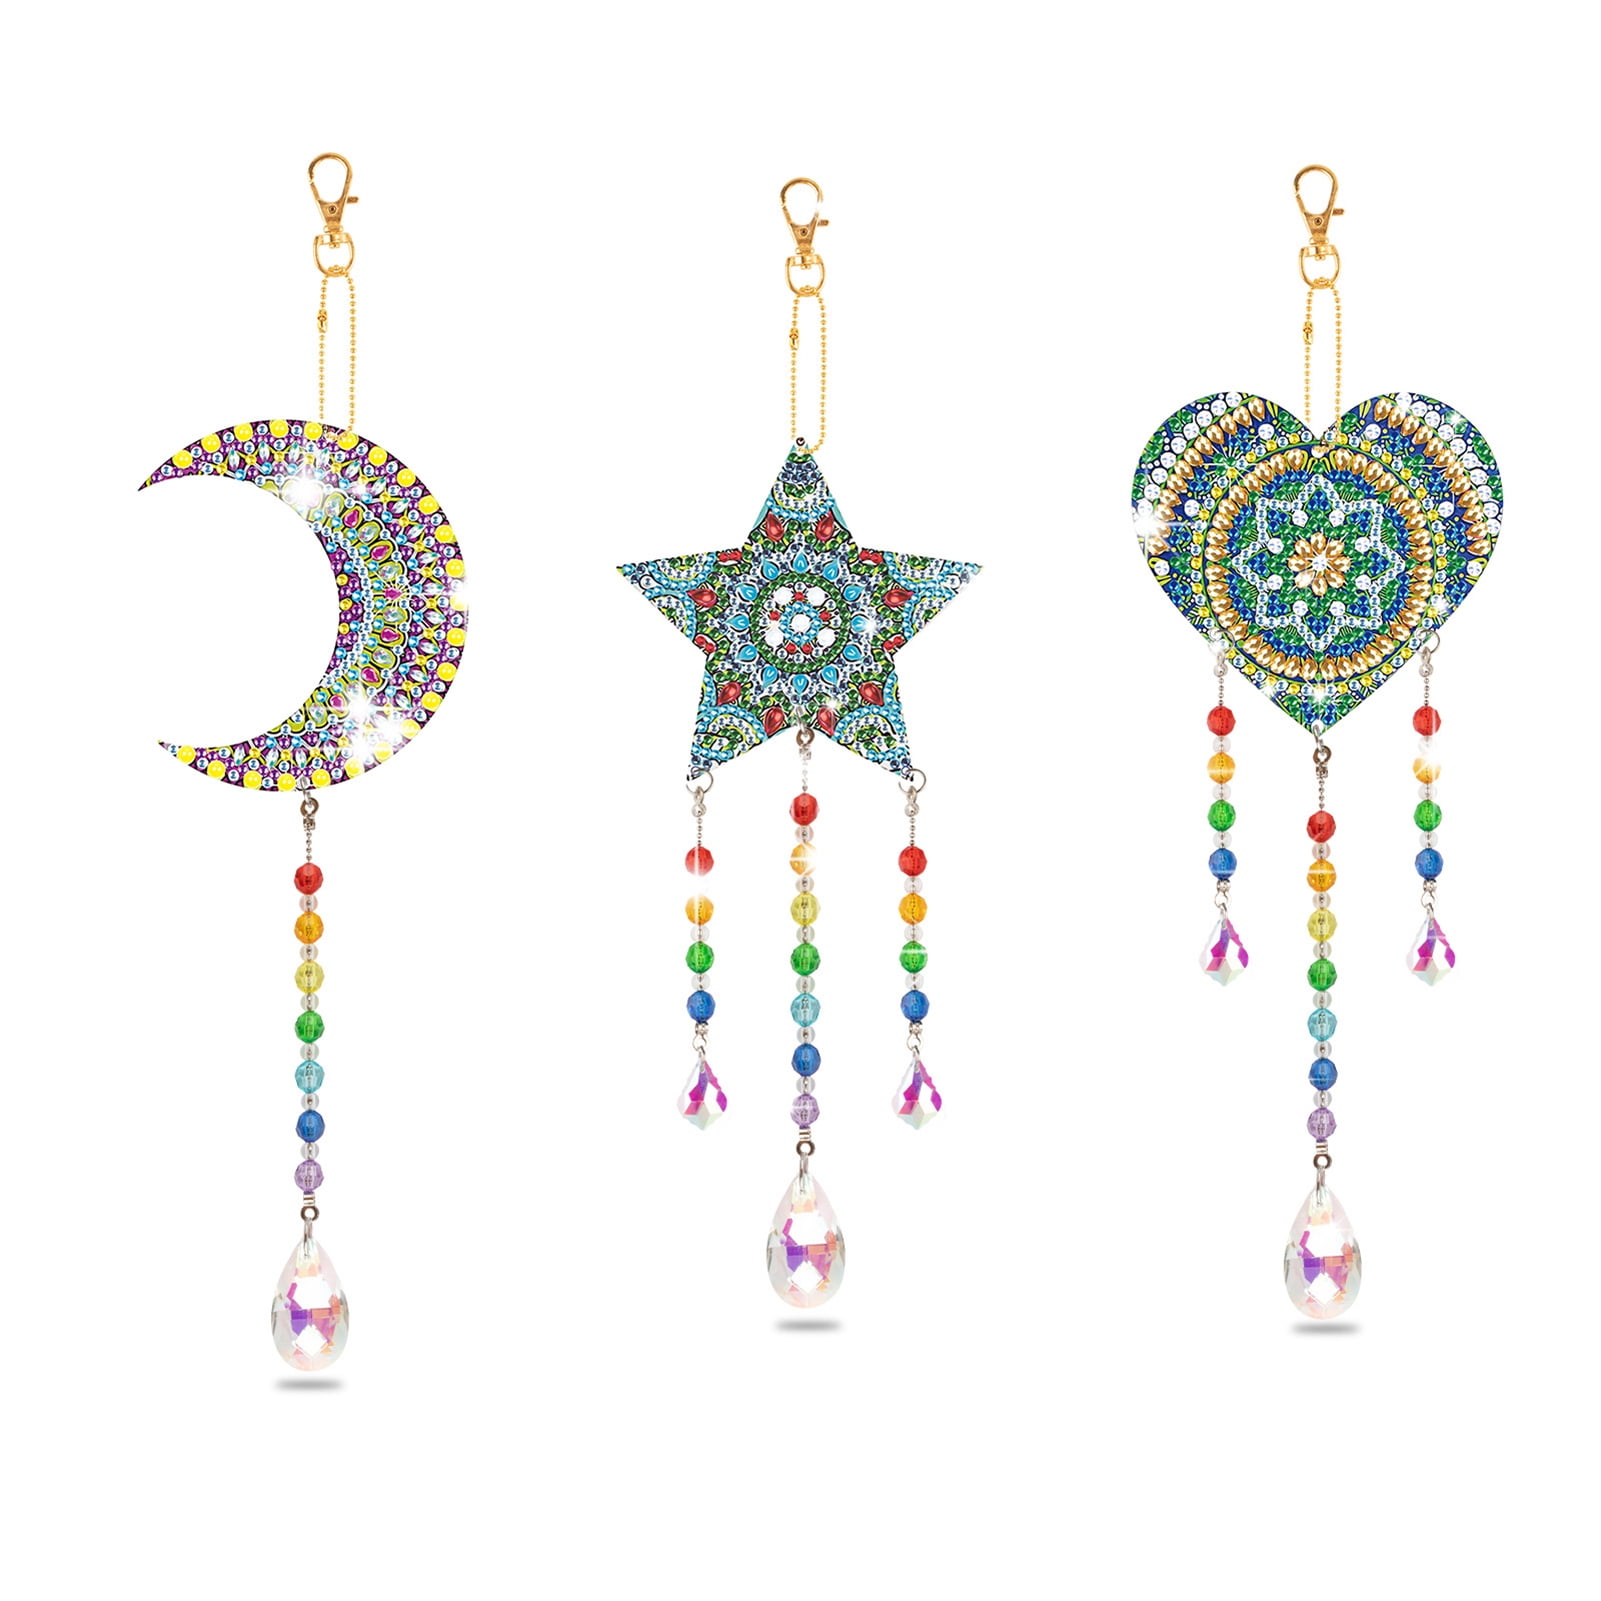  3 Pieces Diamond Painting Suncatcher Wind Chime Cross Sun Star  Moon Heart Mandala Double Sided Crystal Gem Paint by Number Diamond  Painting Hanging Ornament for Home Garden (Moon, Heart, Mandala) 